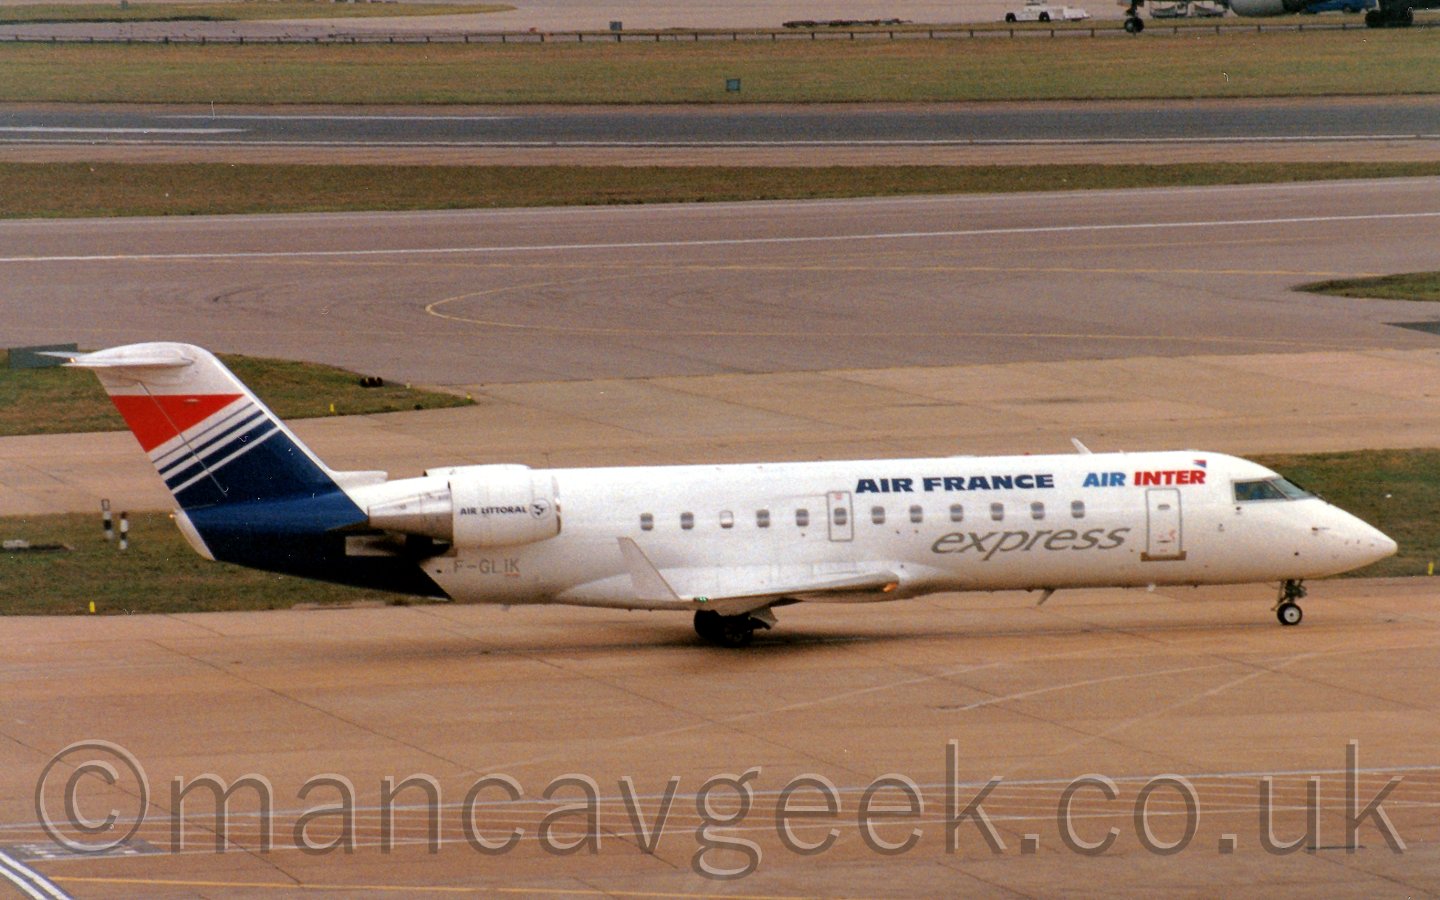 Side view of a white, twin angined jet airliner, with a blue and red tail, and the engines mounted on the rear fuselage, taxiing from left to right.